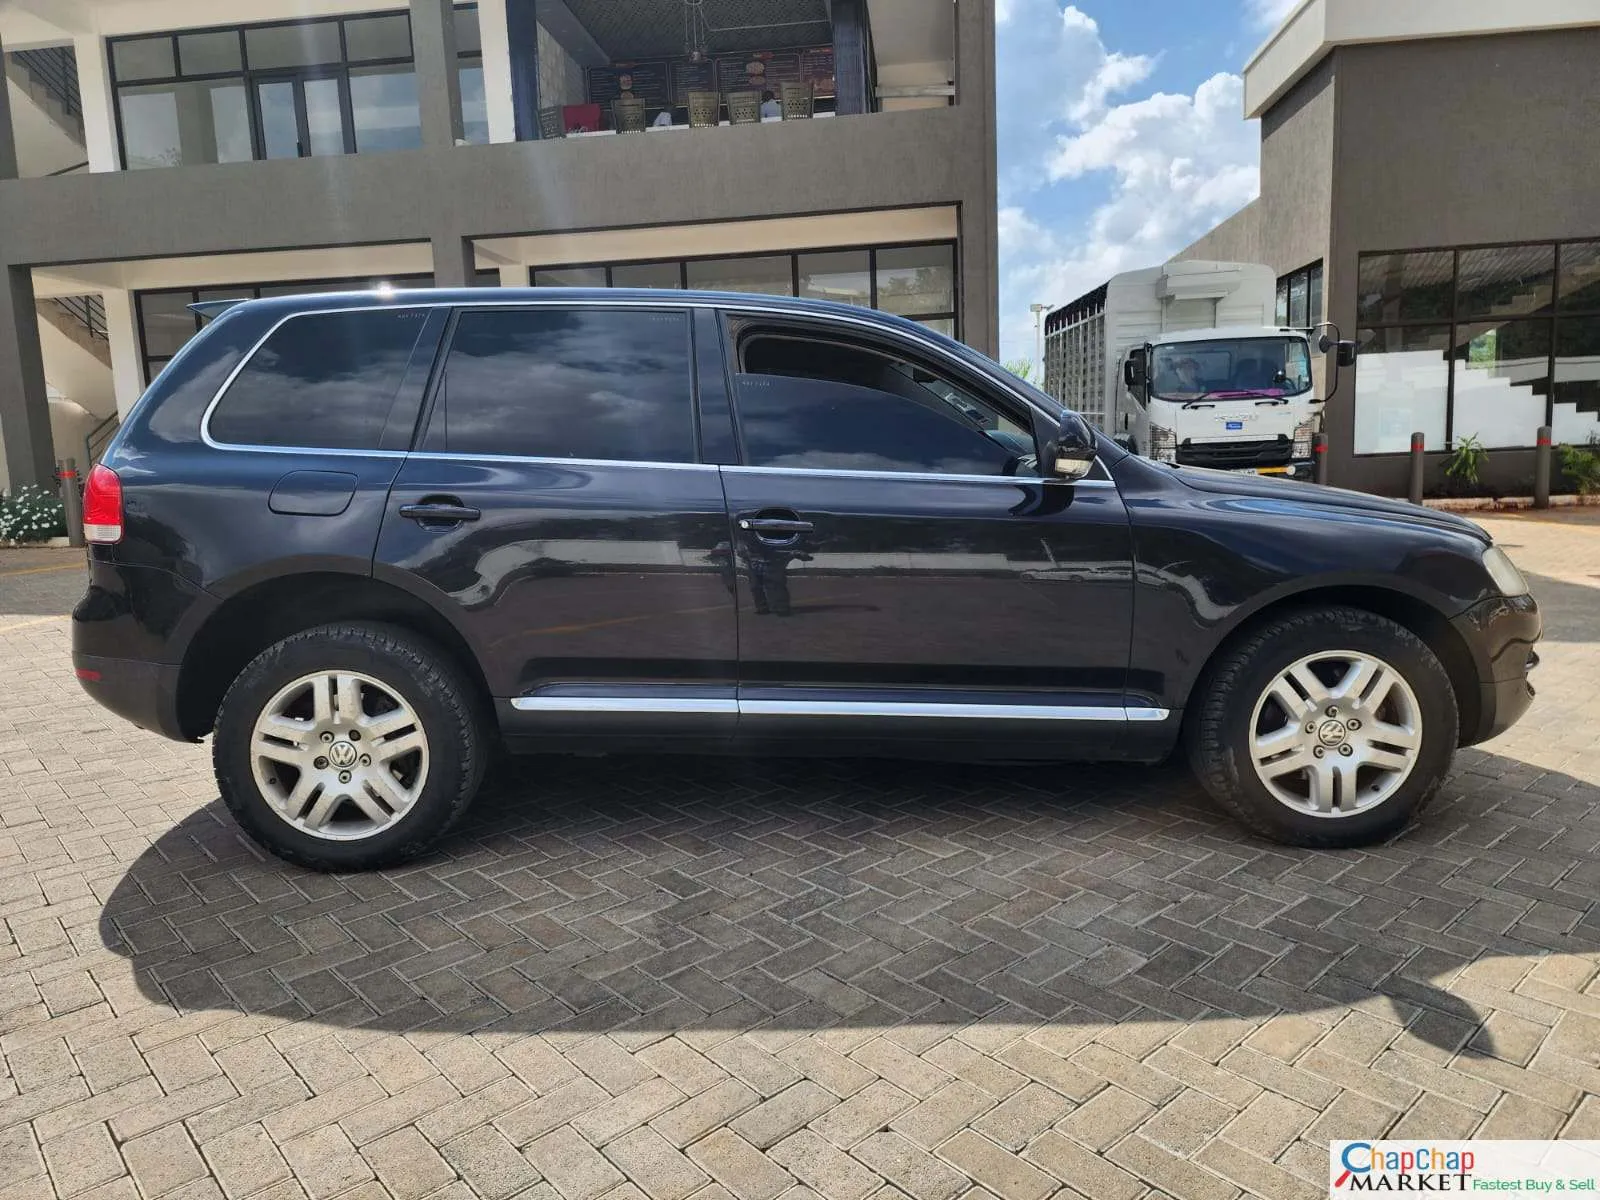 Volkswagen Touareg For sale in kenya hire purchase installments You Pay 30% Deposit Trade in OK EXCLUSIVE Touareg Kenya